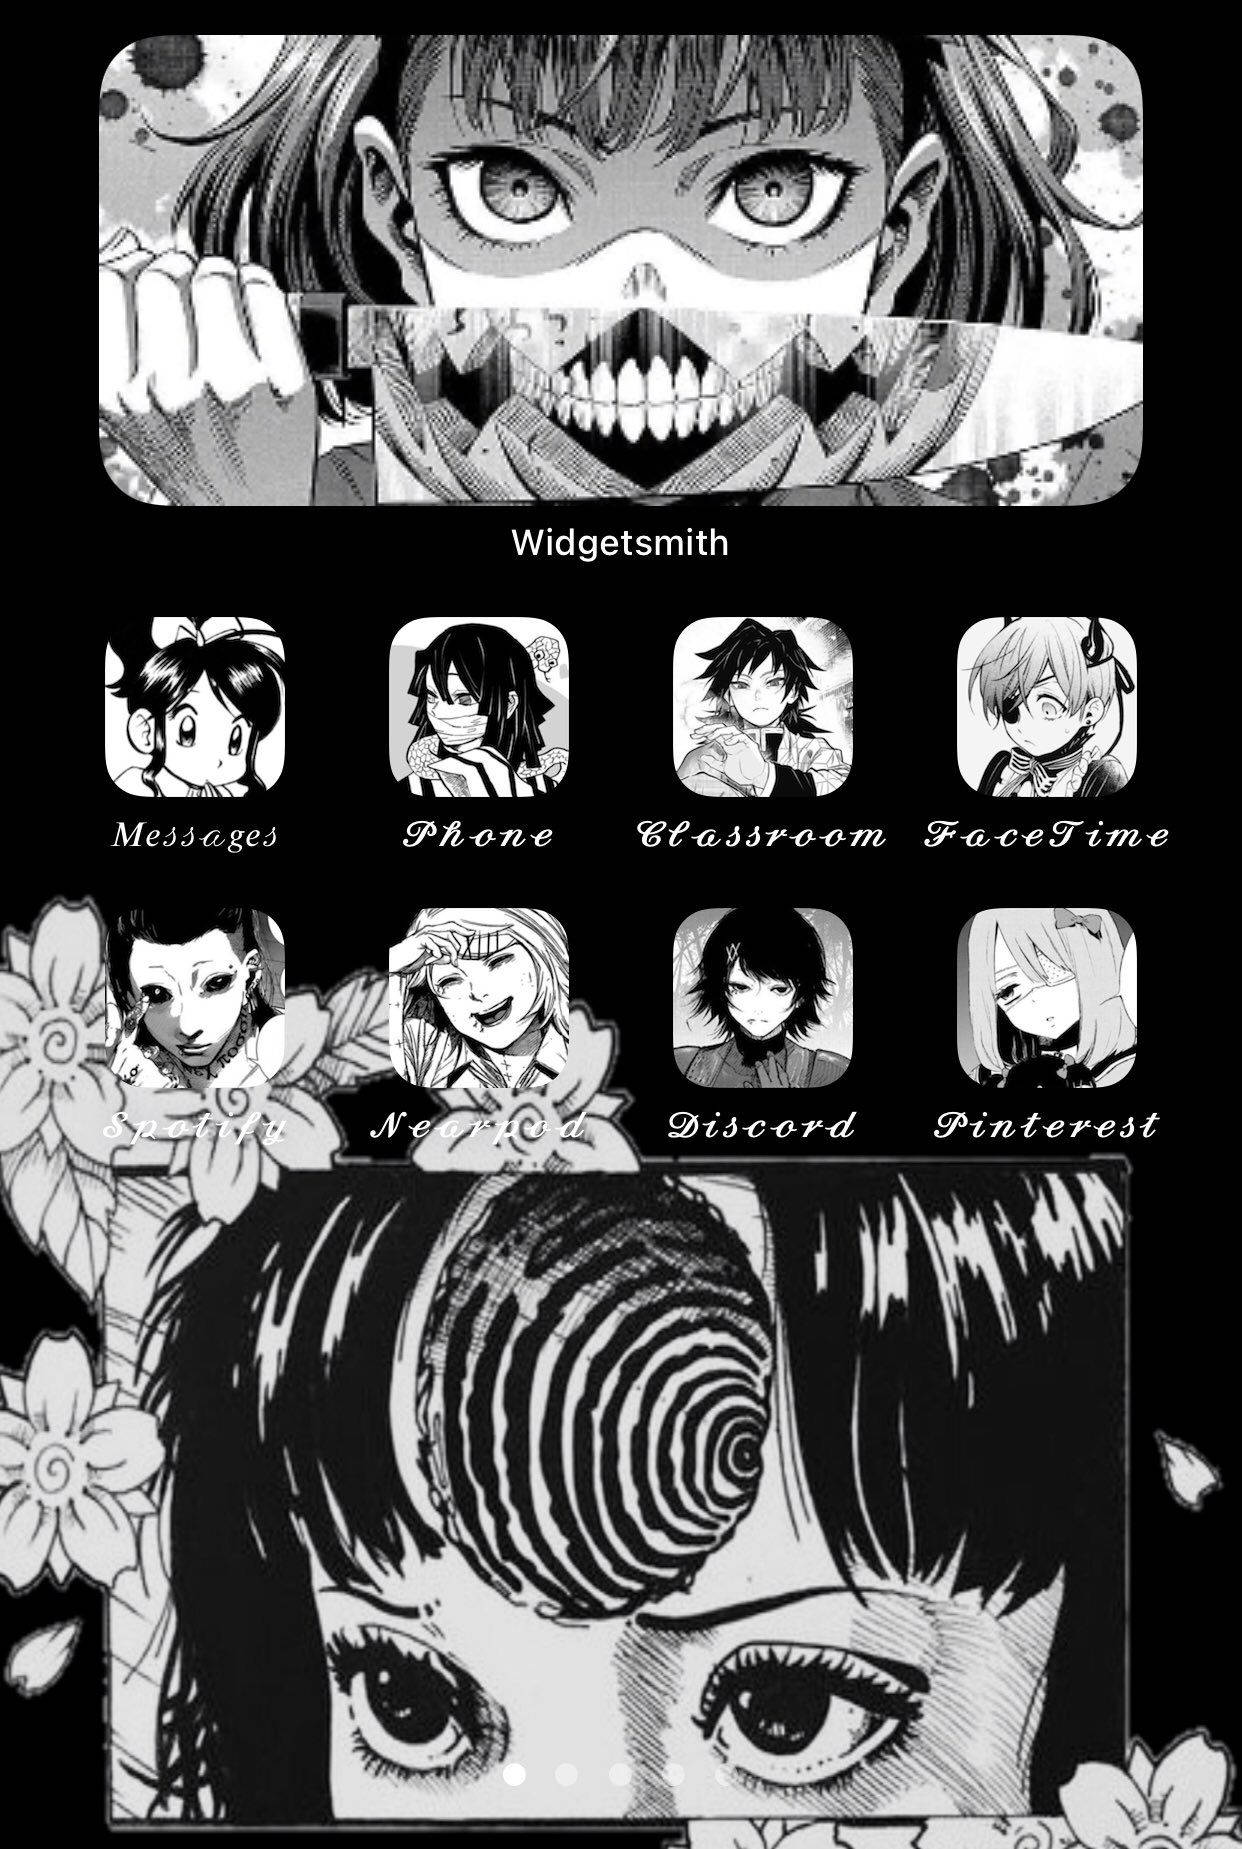 Get the newest Manga on your Iphone Wallpaper